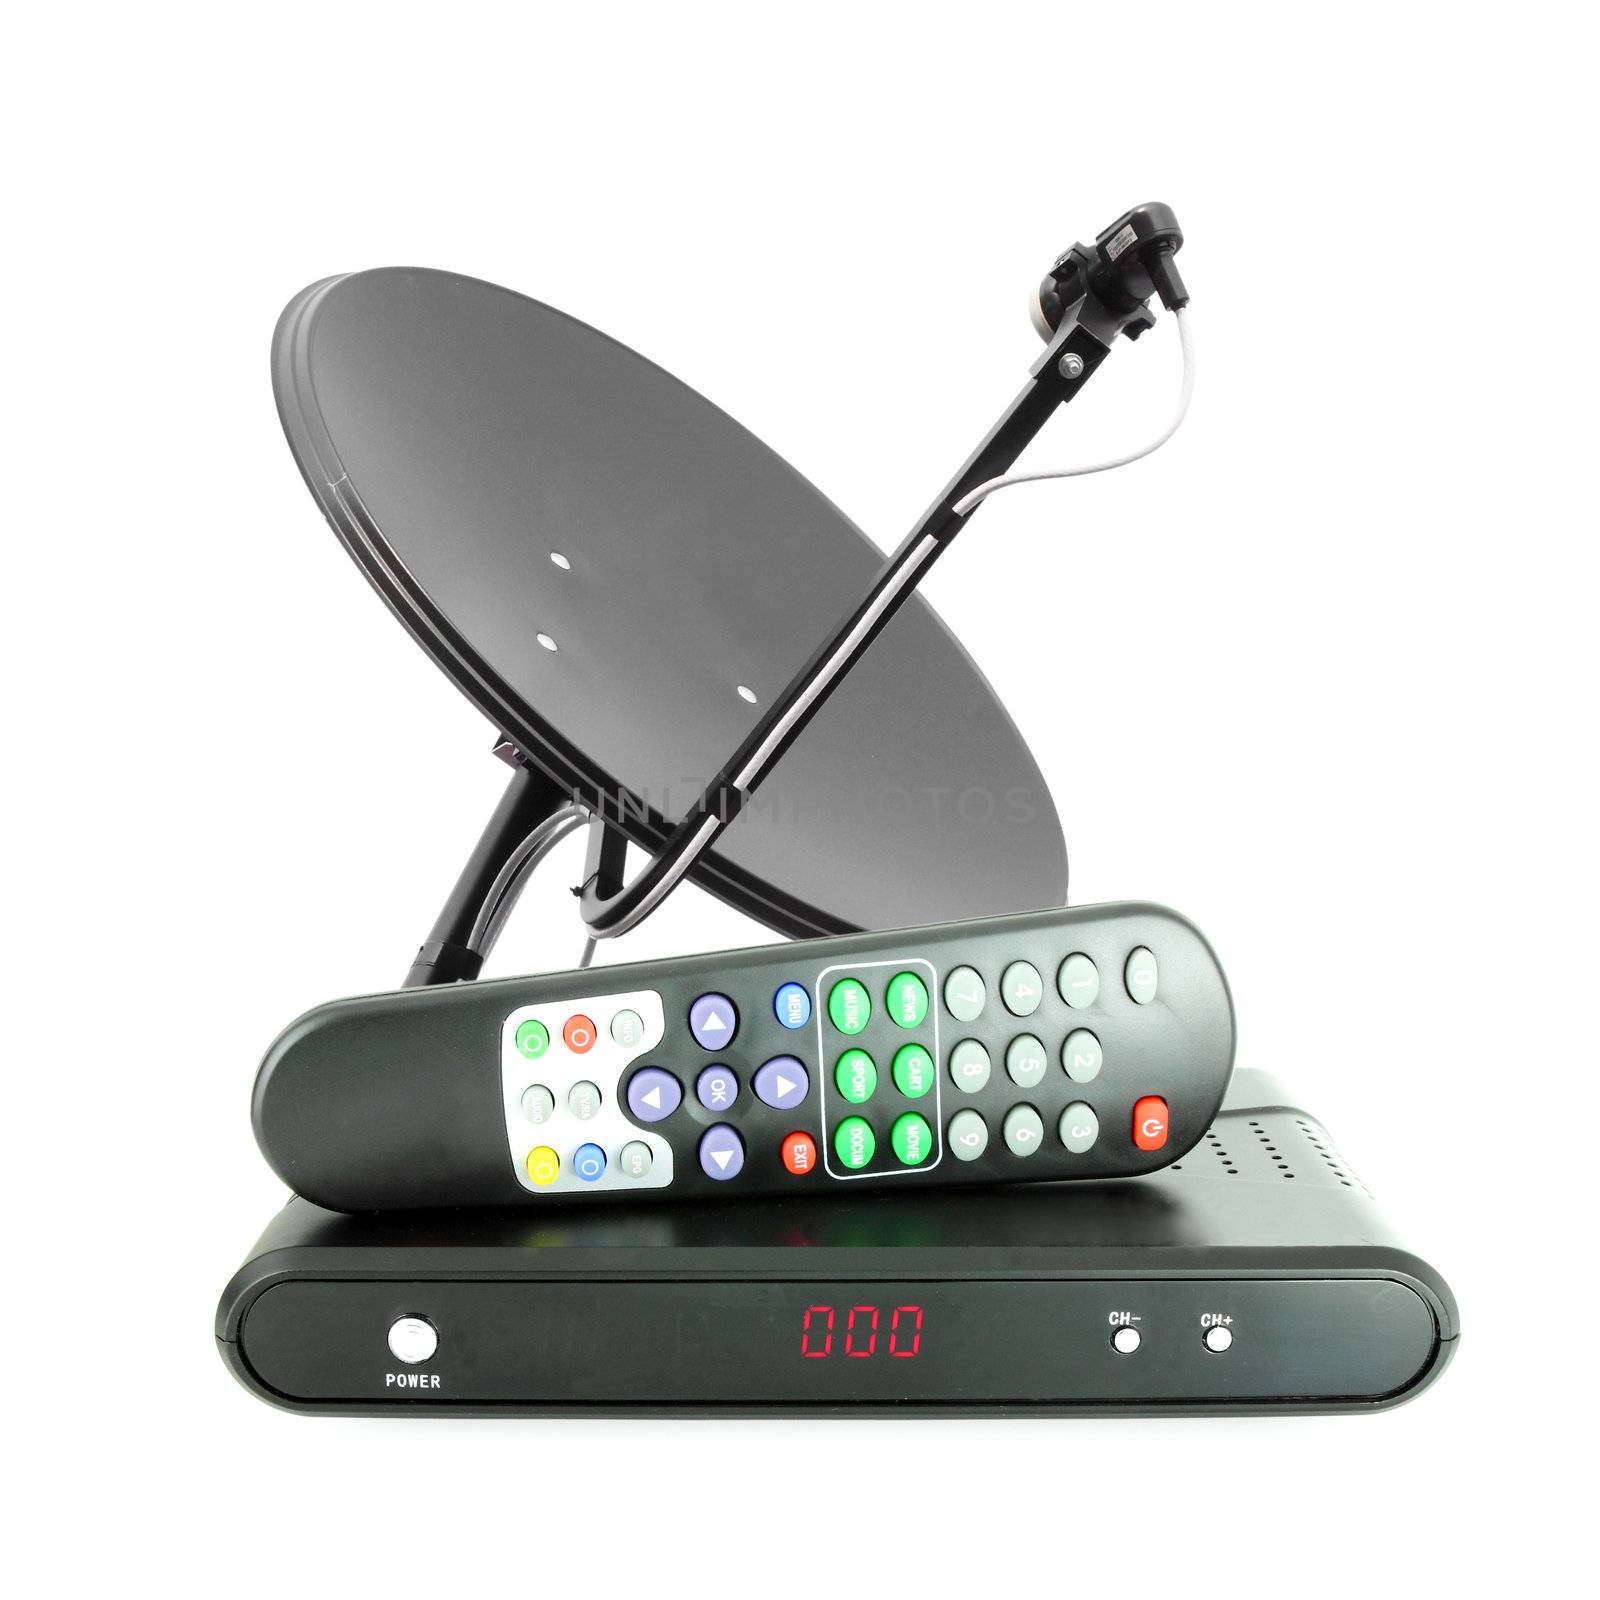 Set of receive box remote and dish antenna on white